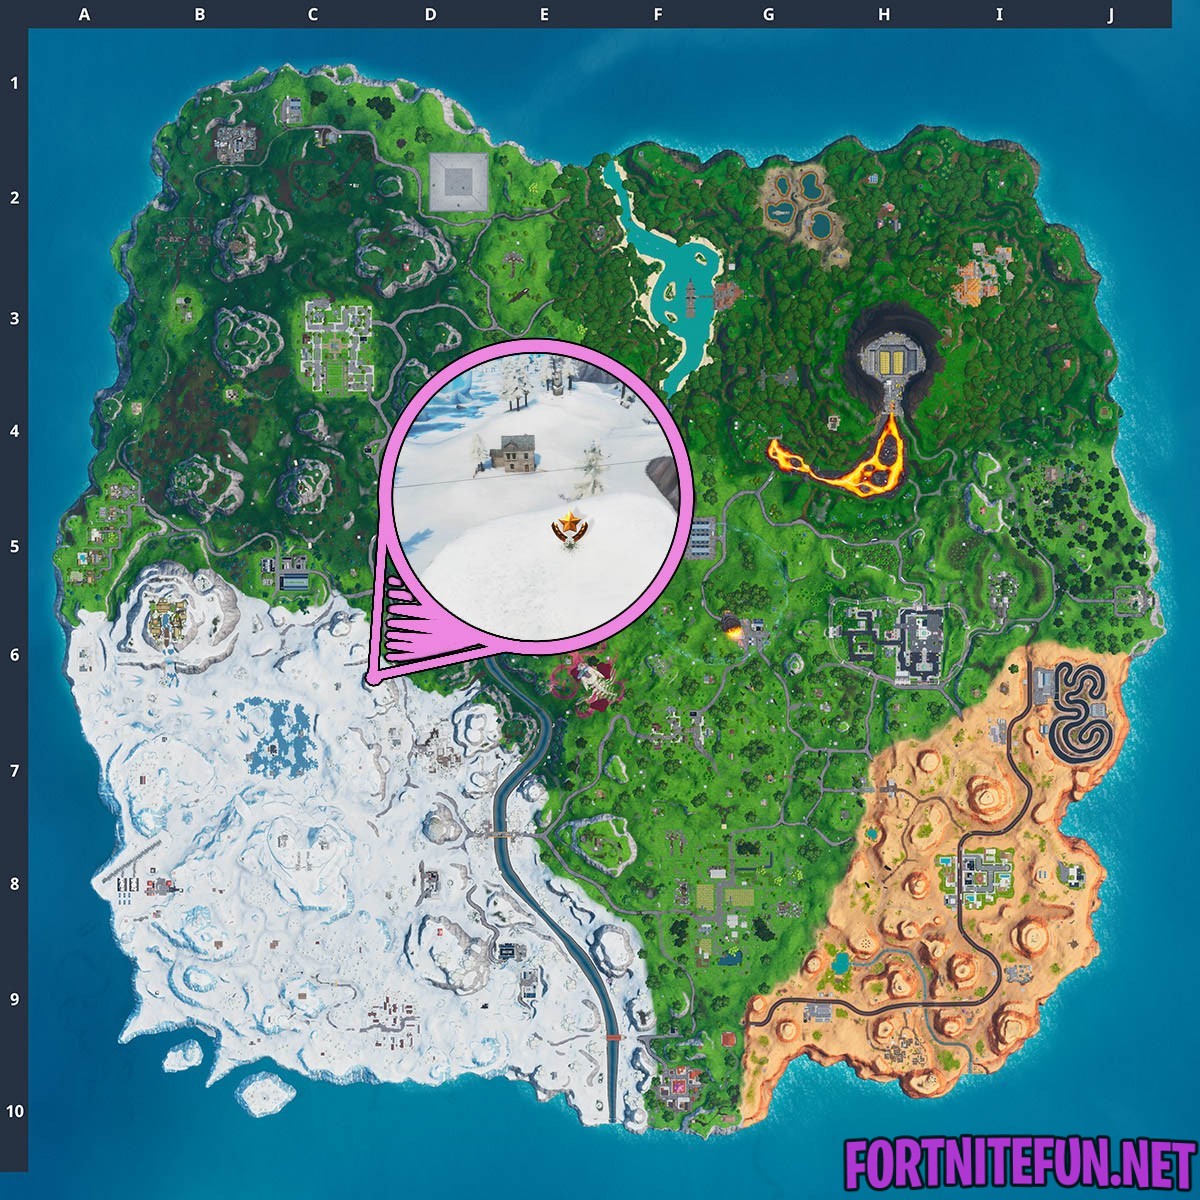 uitdrukking Refrein Havoc Search Between A Basement Film Camera, A Snowy Stone Head And A Flashy Gold  Big Rig Fortnite Location - Fortnite Battle Royale